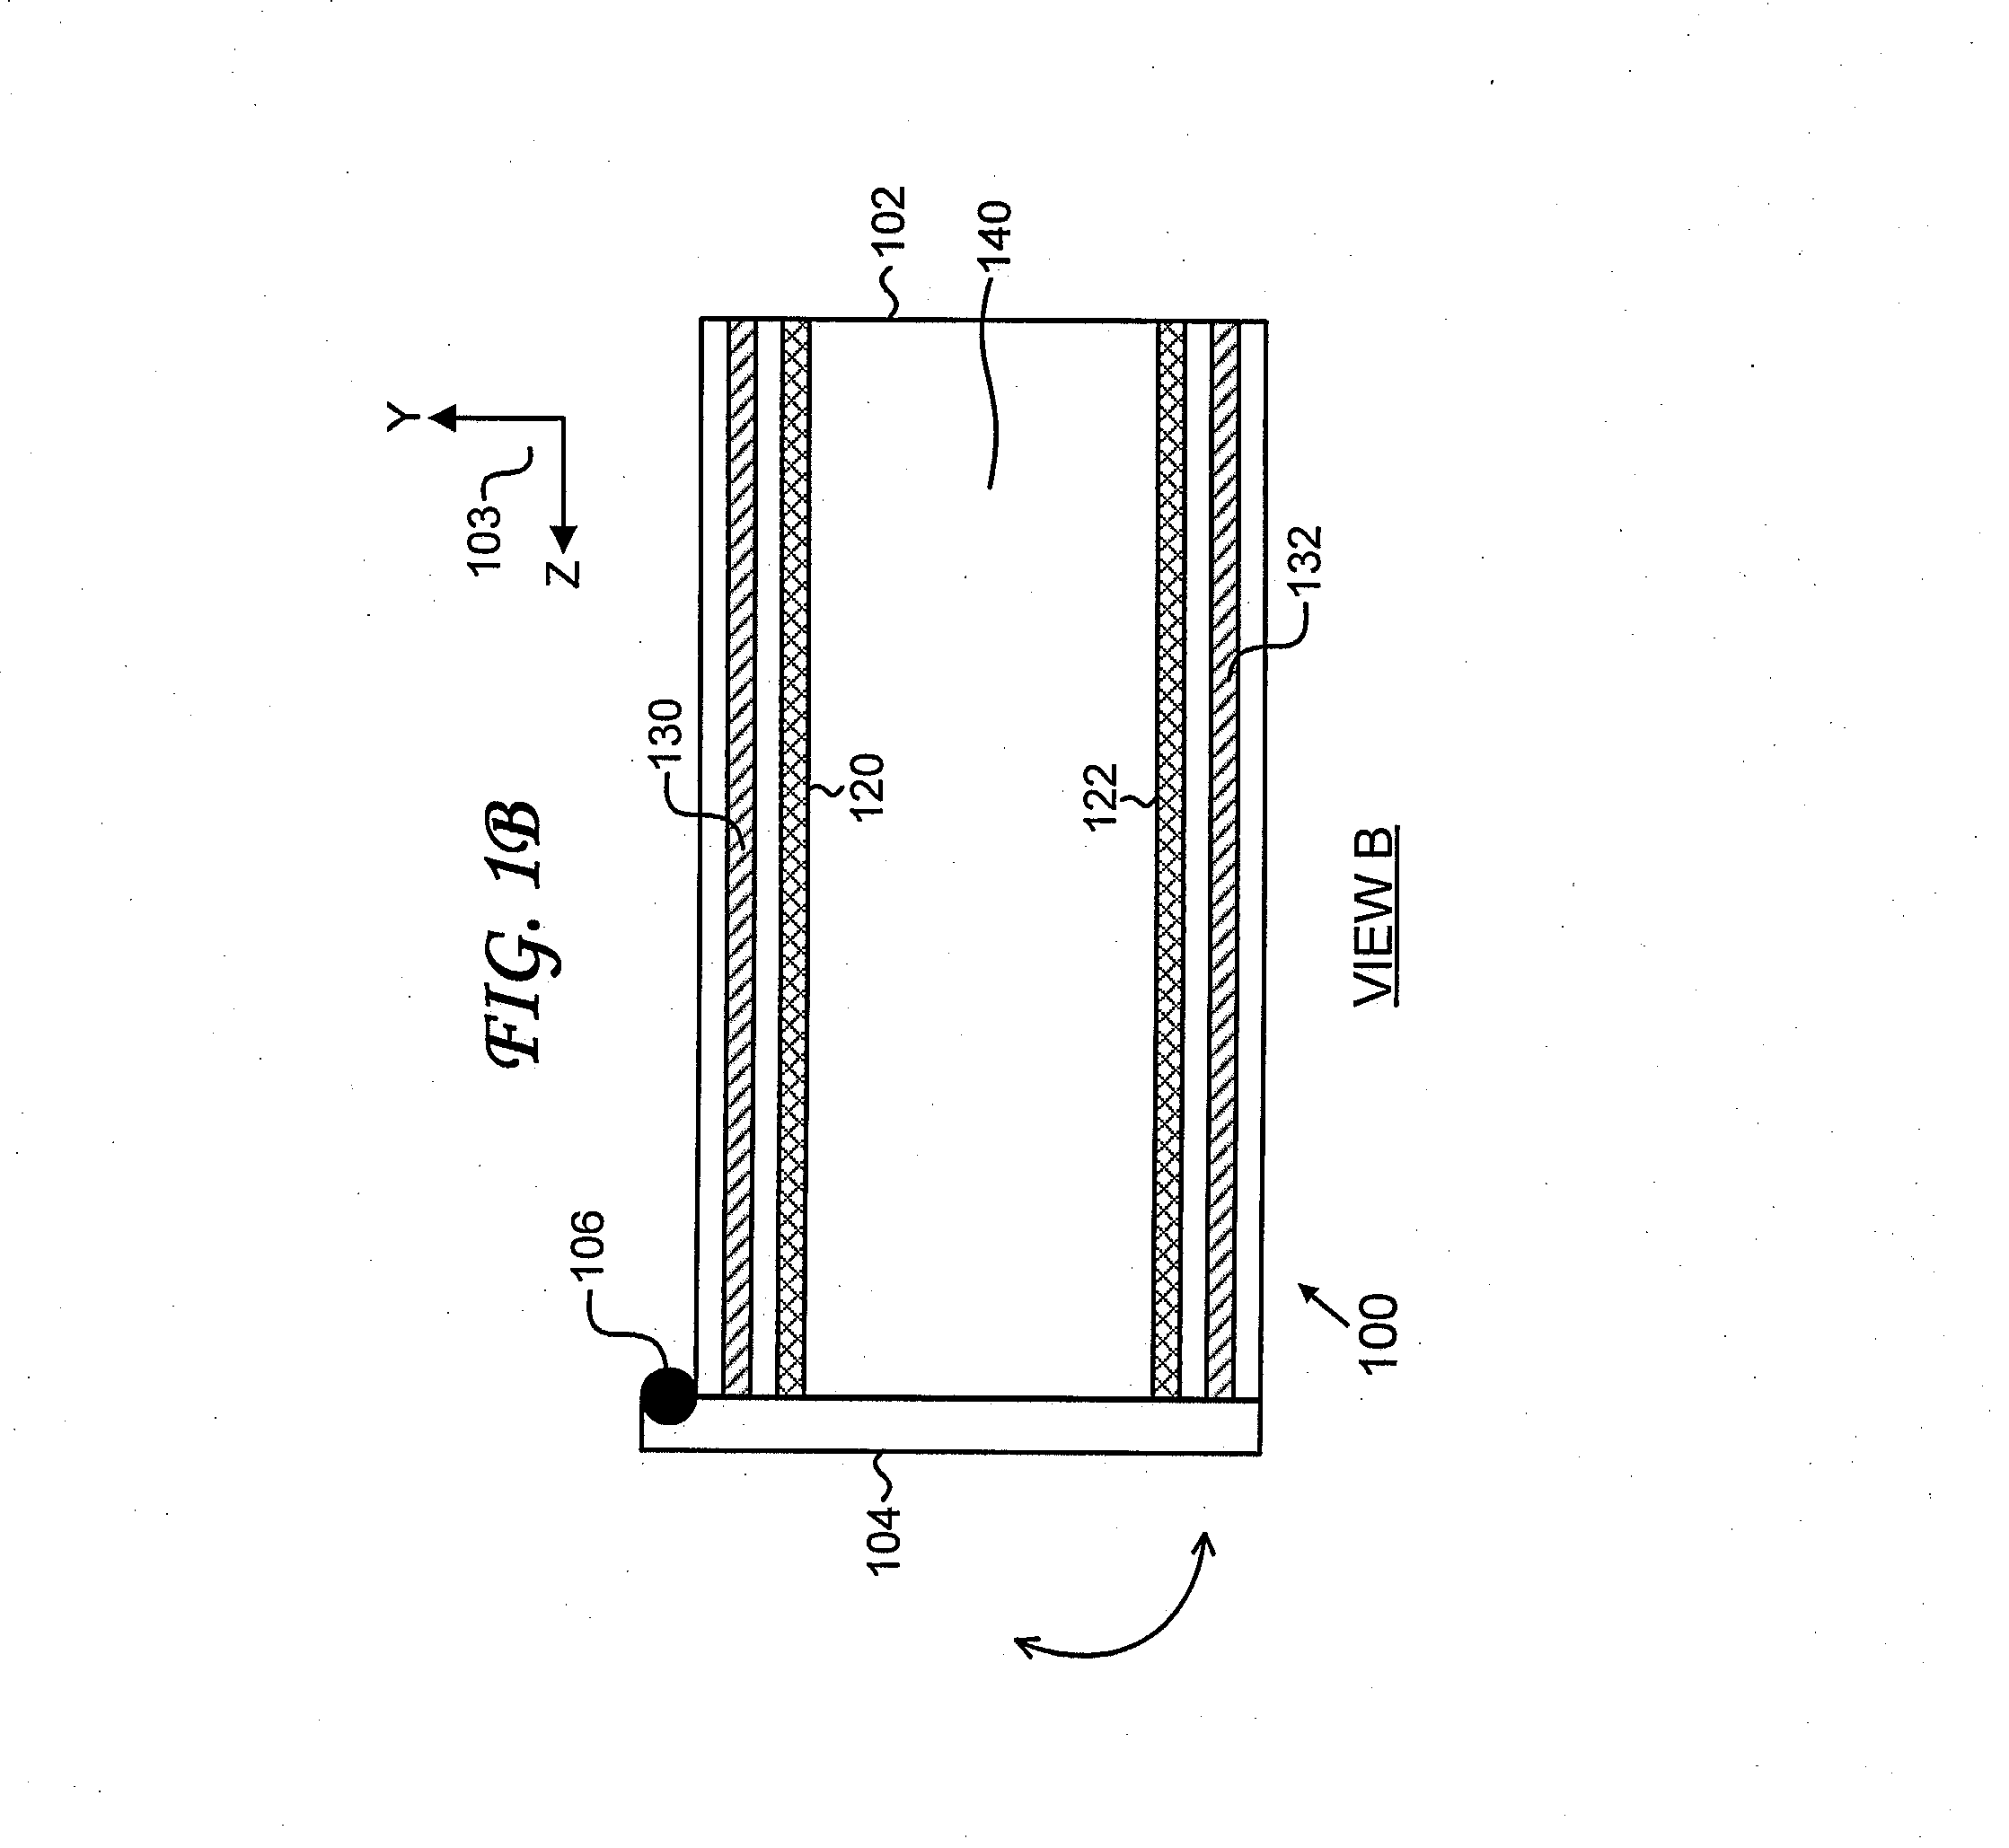 Method and Apparatus for Sterilization of Medical Instruments and Devices by Ultraviolet Sterilization